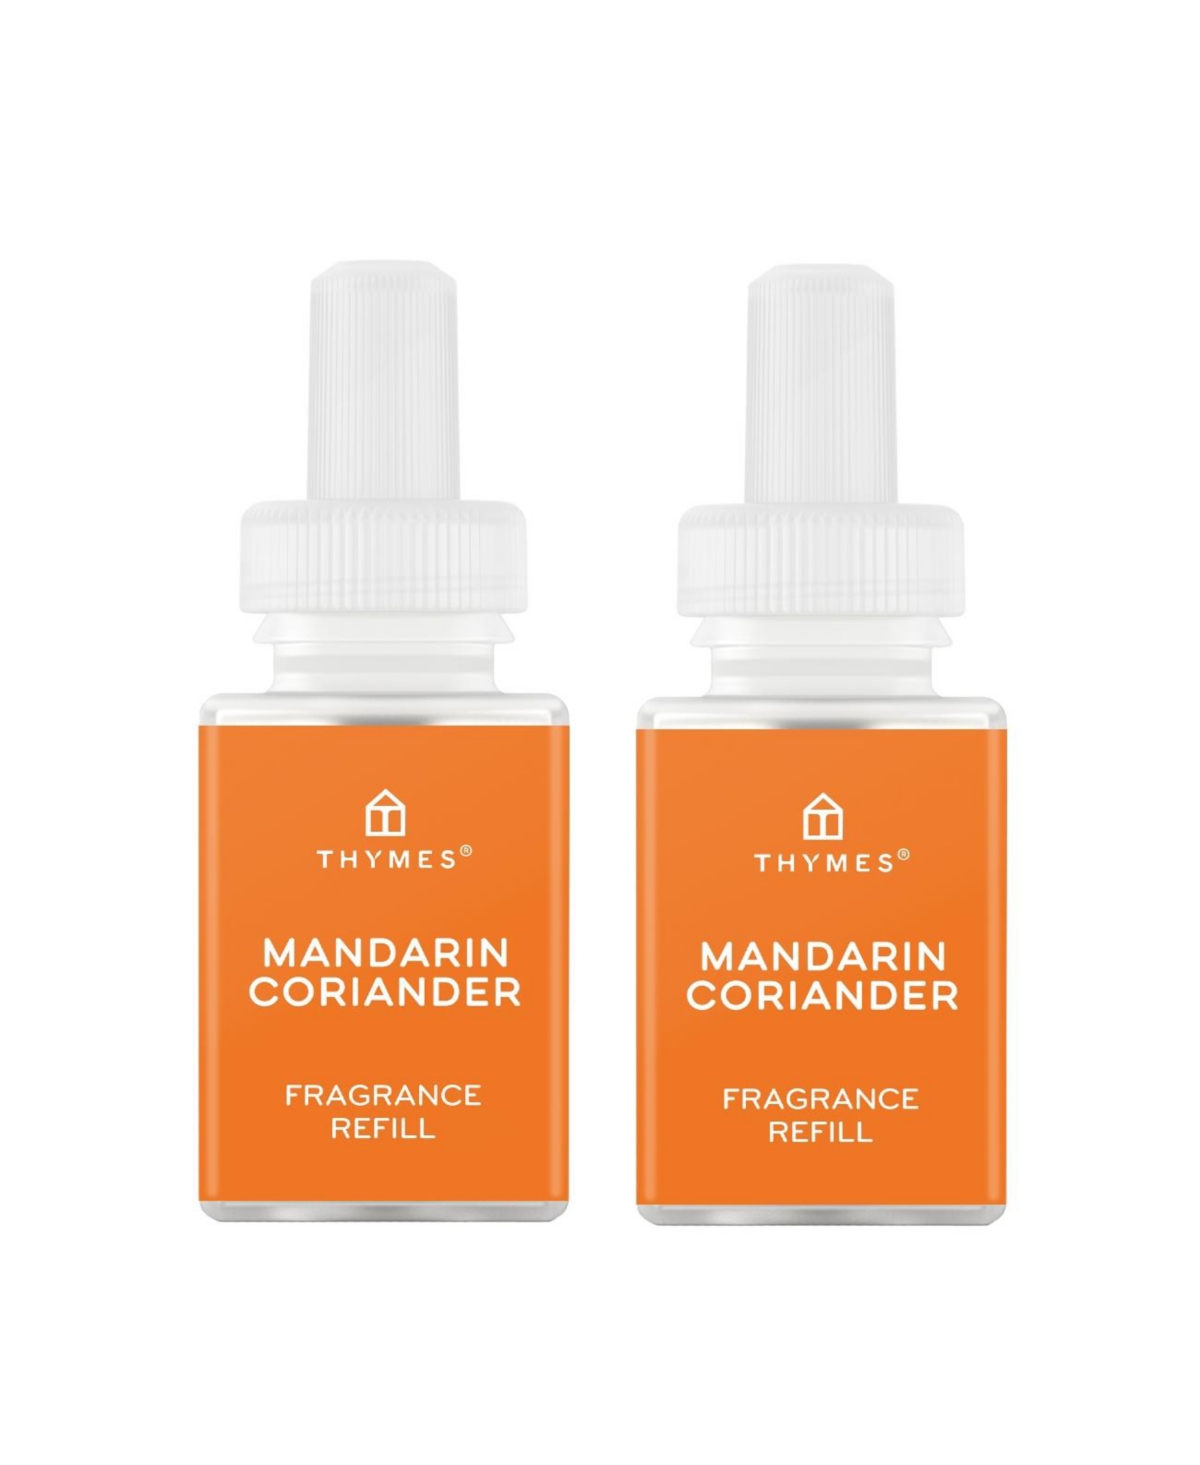 and Thymes - Mandarin Coriander - Fragrance for Smart Home Air Diffusers - Room Freshener - Aromatherapy Scents for Bedrooms & Living Rooms - 2 P